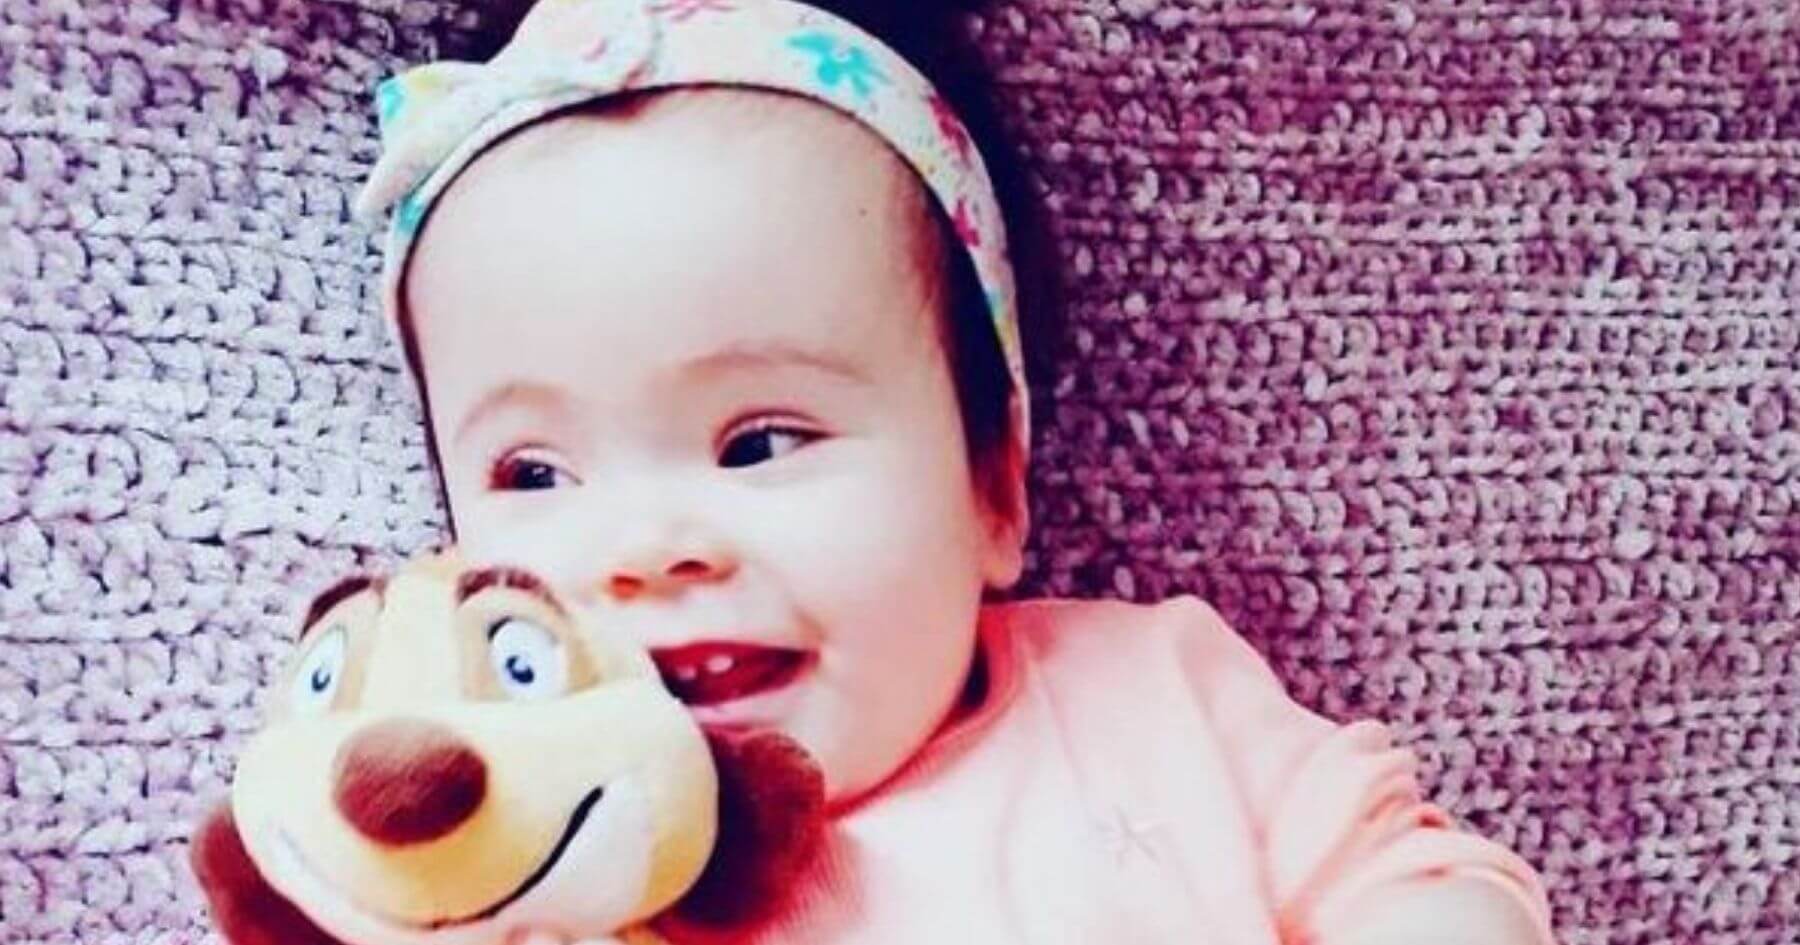 Baby whom doctors advised should be aborted, now ‘happiest wee girl’